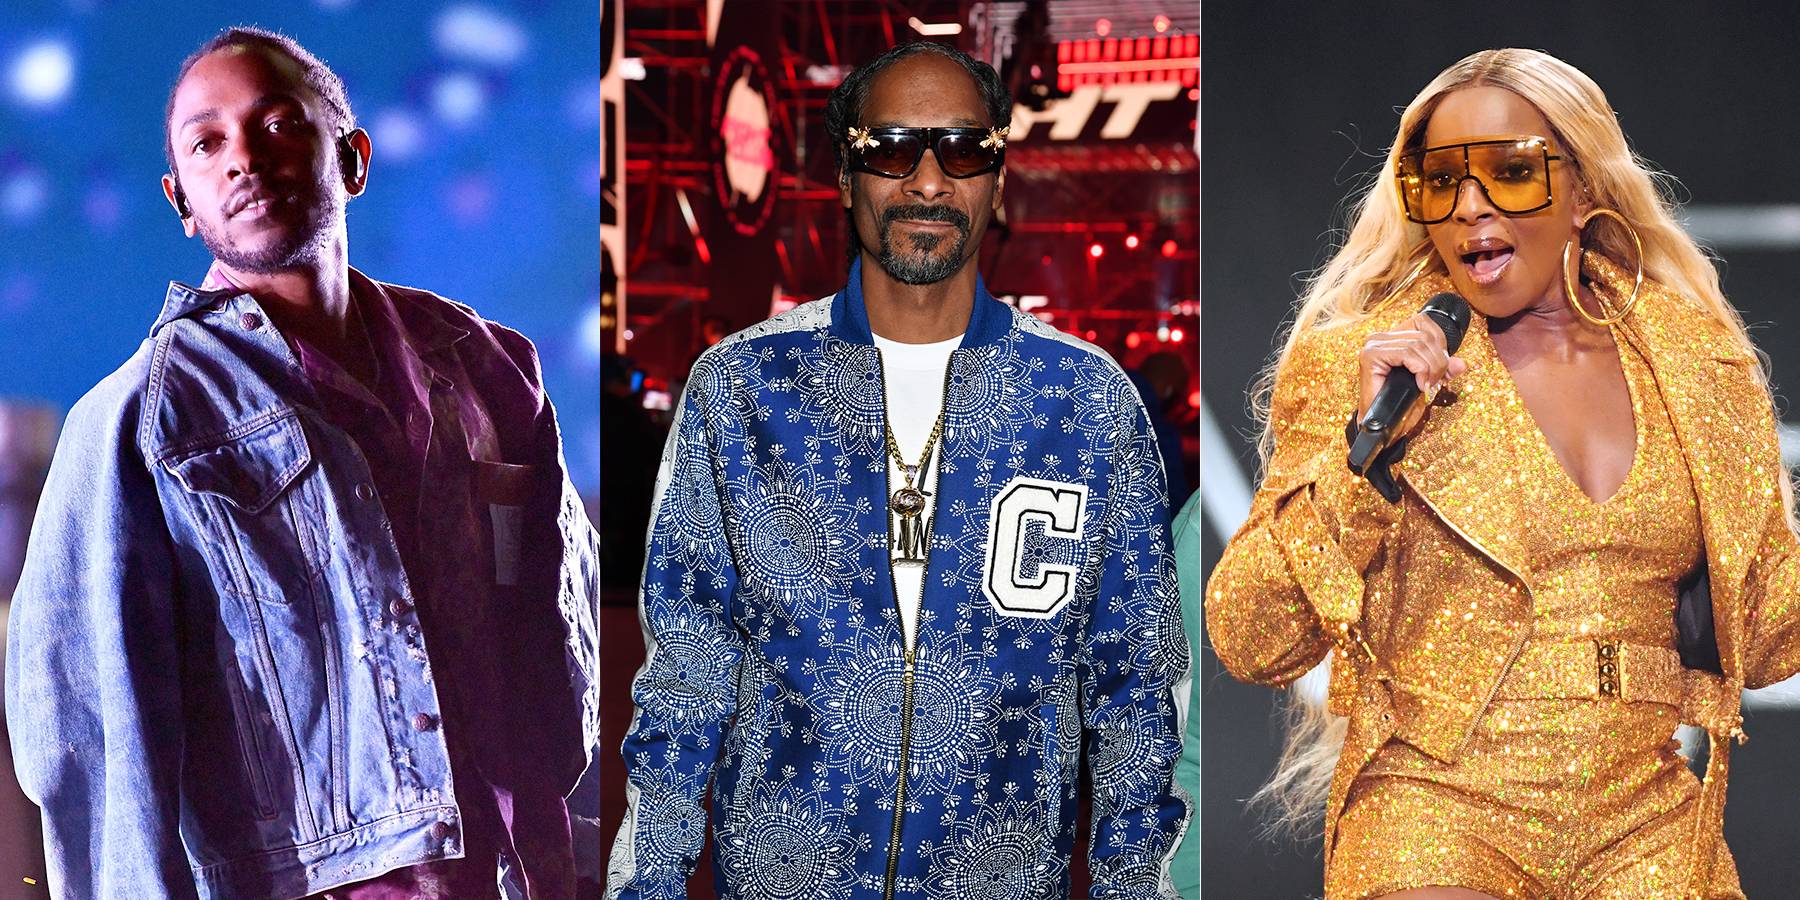 Super Bowl 2022 halftime show: Who are the performers this year and what can  viewers expect? 